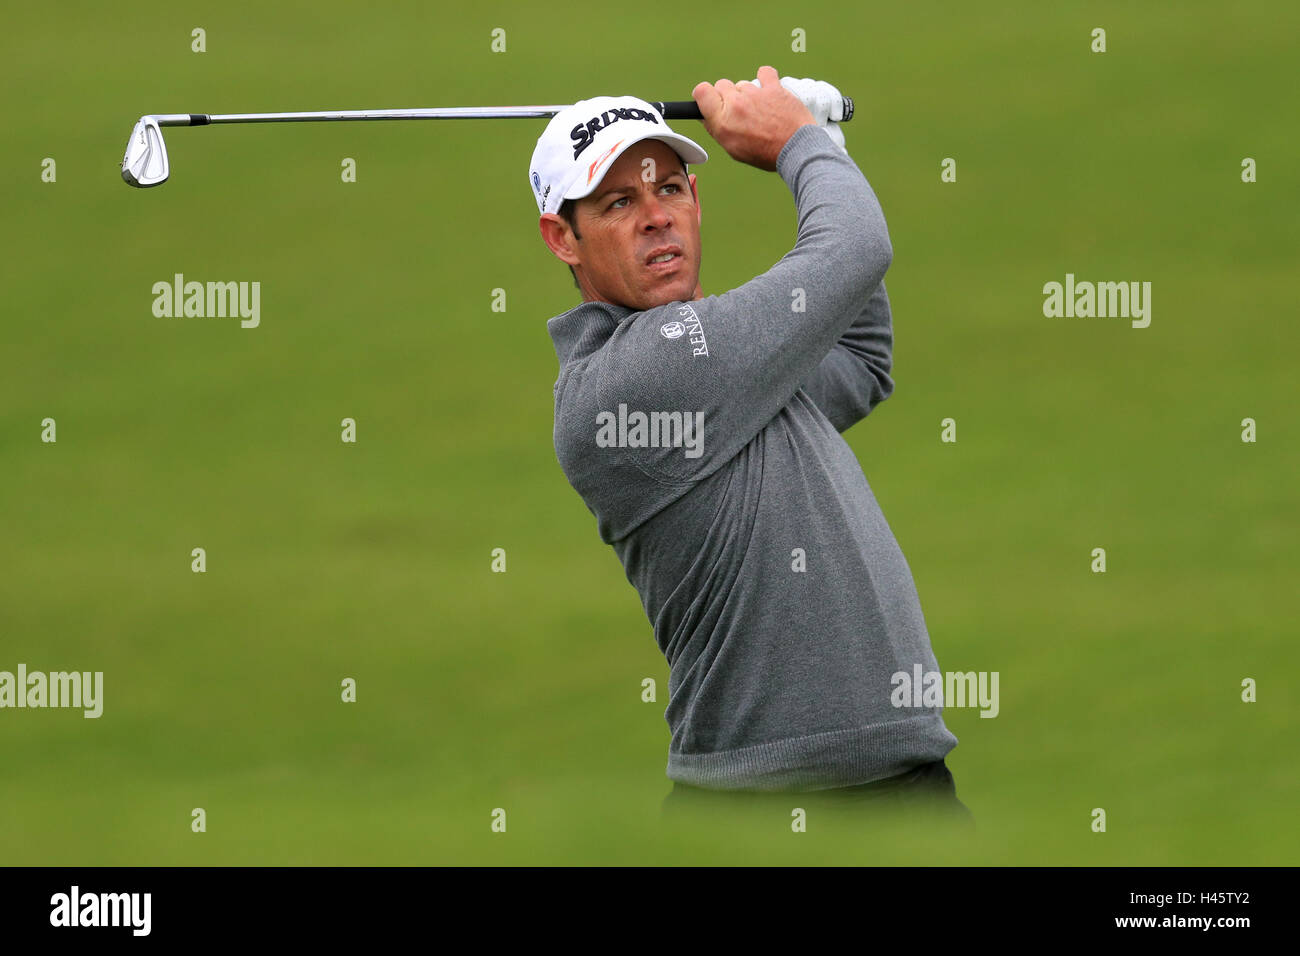 South Africa's Jaco van Zyl during day one of The British Masters at Stock  Photo - Alamy